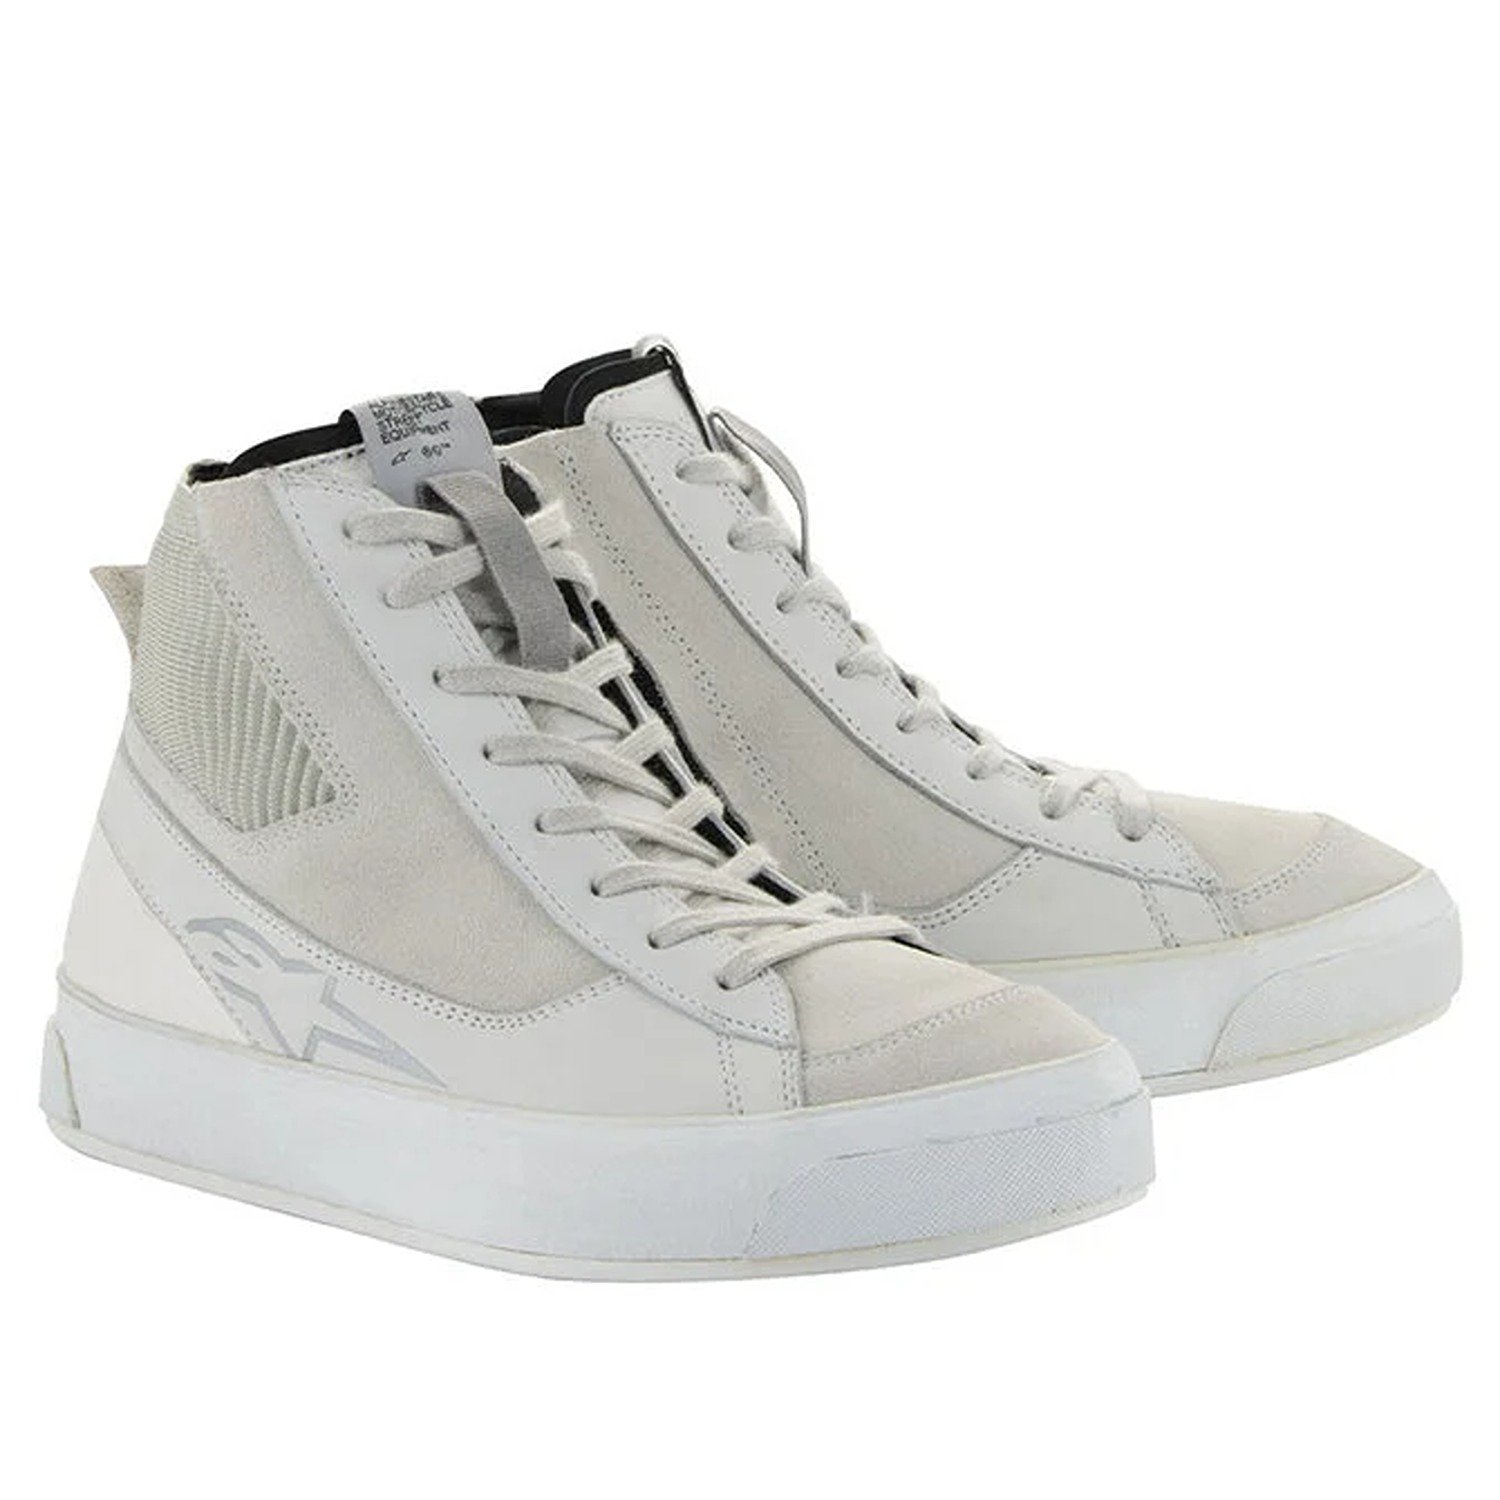 Image of Alpinestars Stella Stated Podium Shoes White Cool Gray Taille US 55